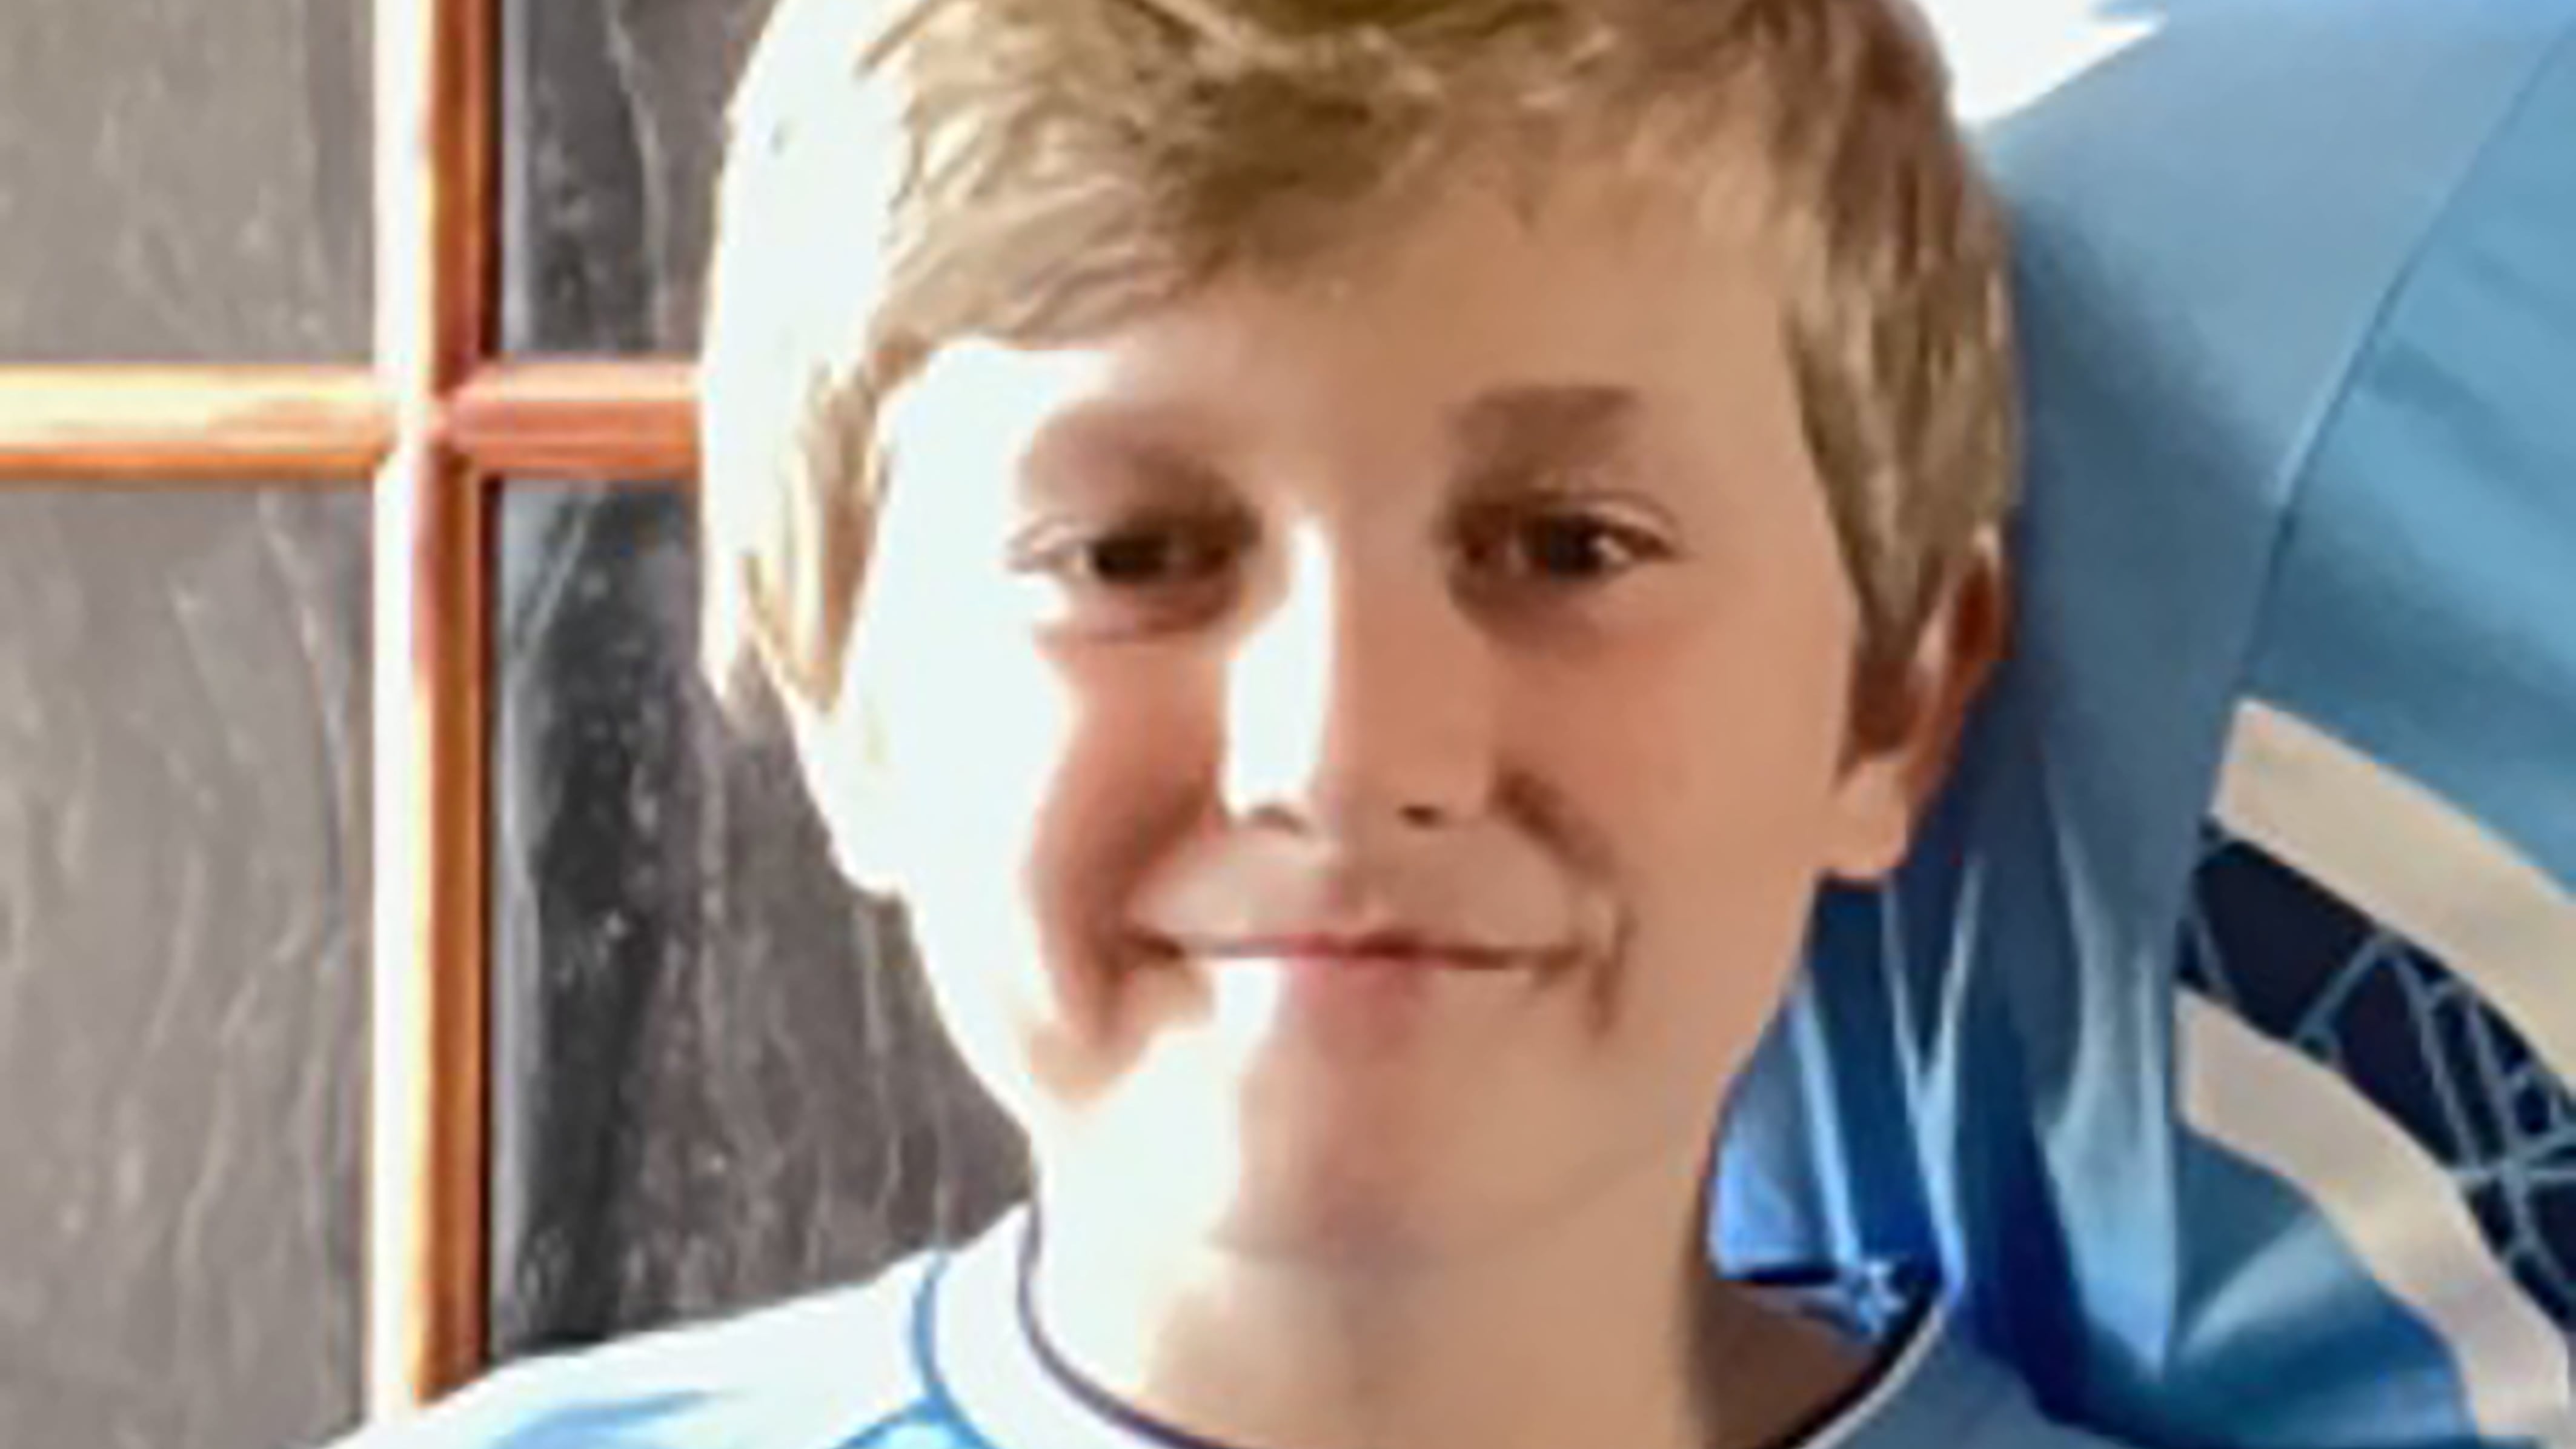 Keaton Slater, 12, was killed in a hit-and-run in Coventry on Friday